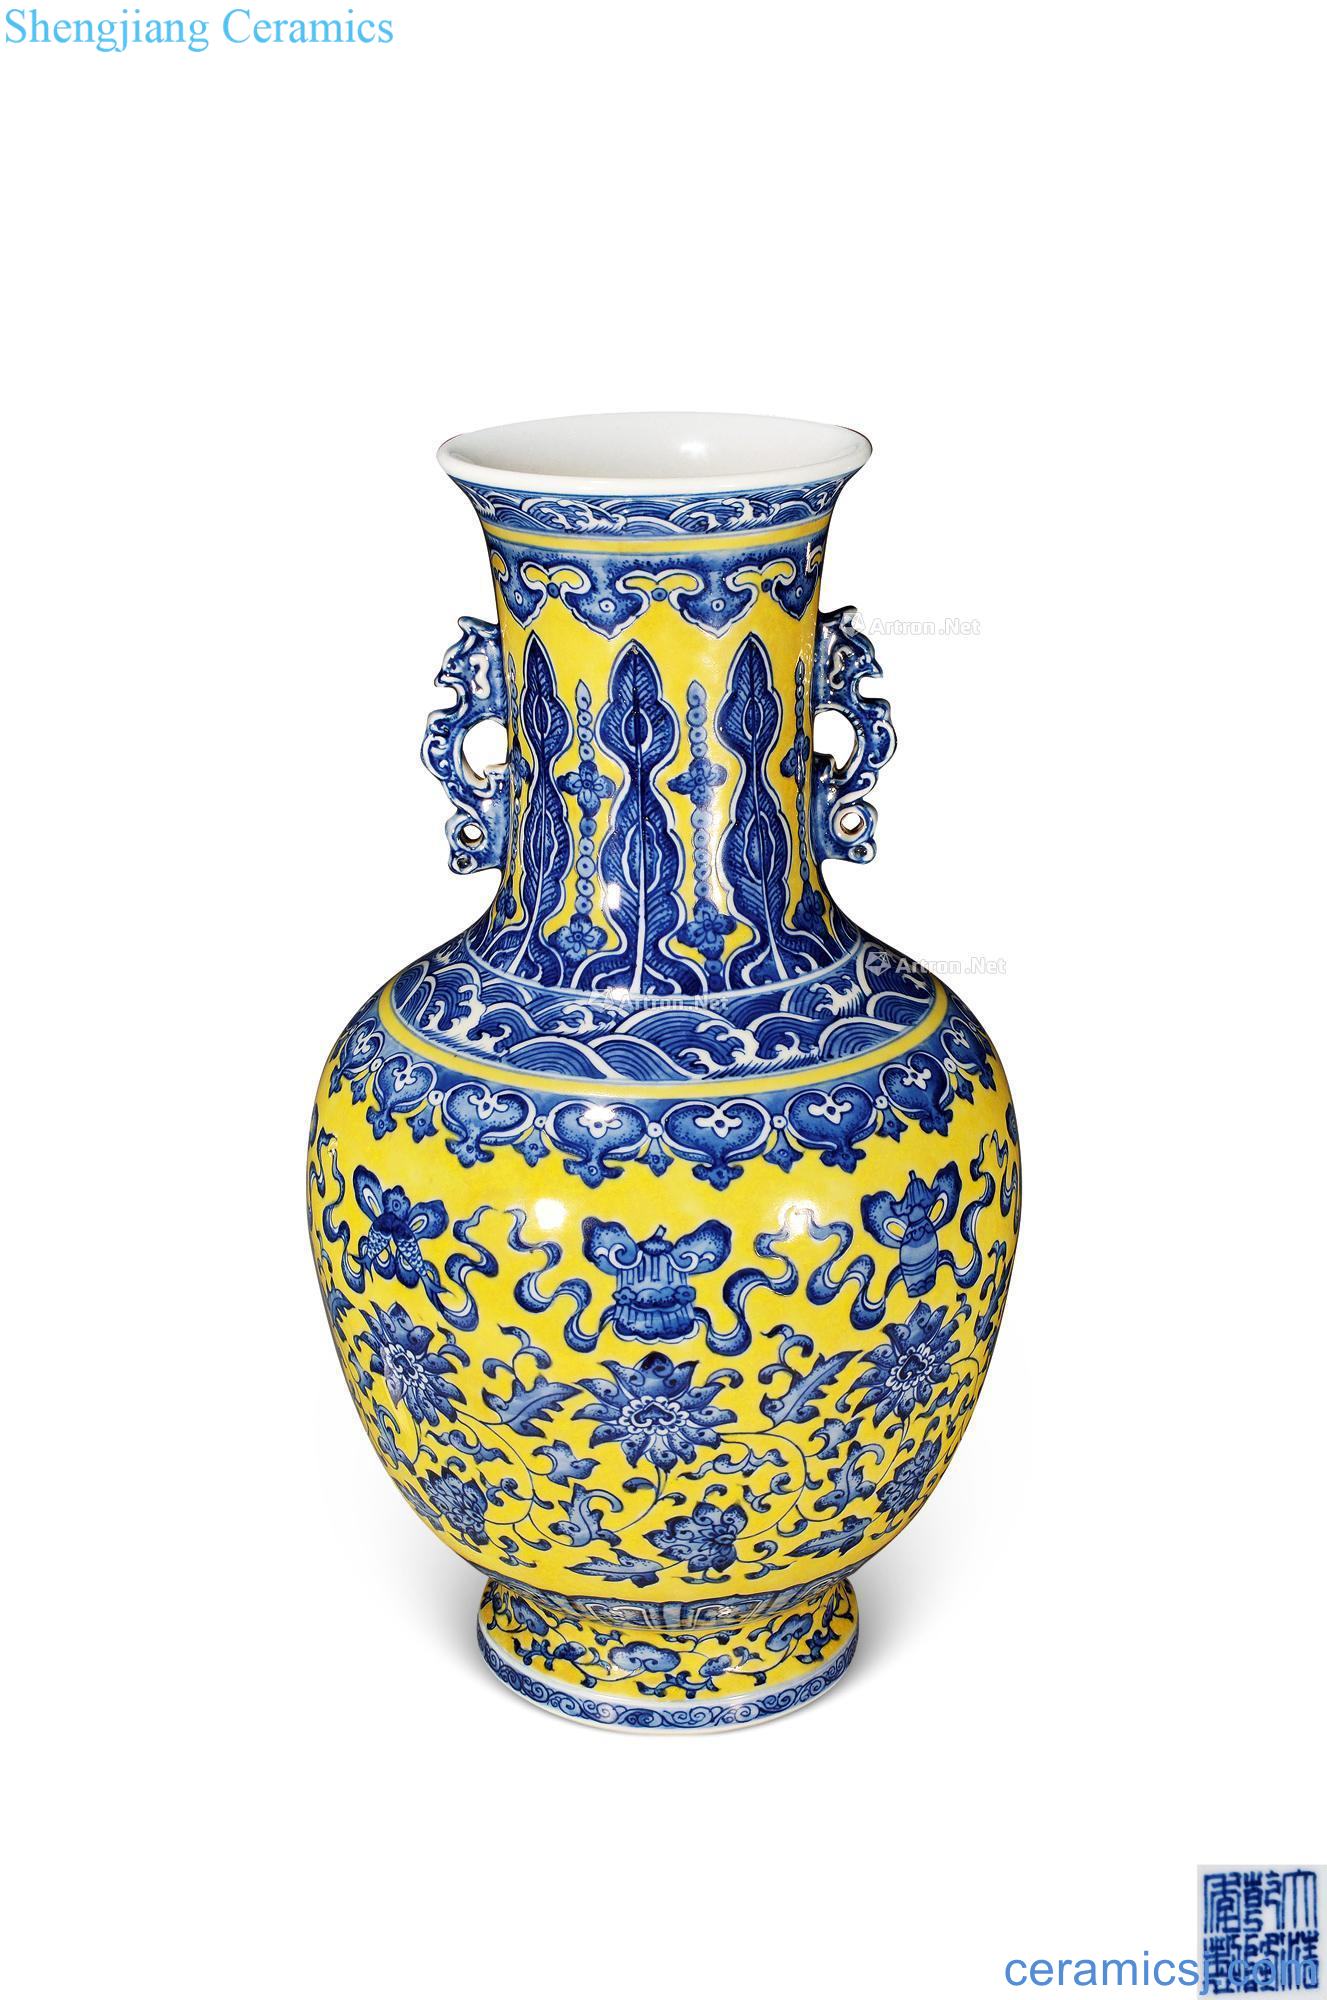 Emperor qianlong Yellow with blue and white vase with a lotus flower grain ssangyong